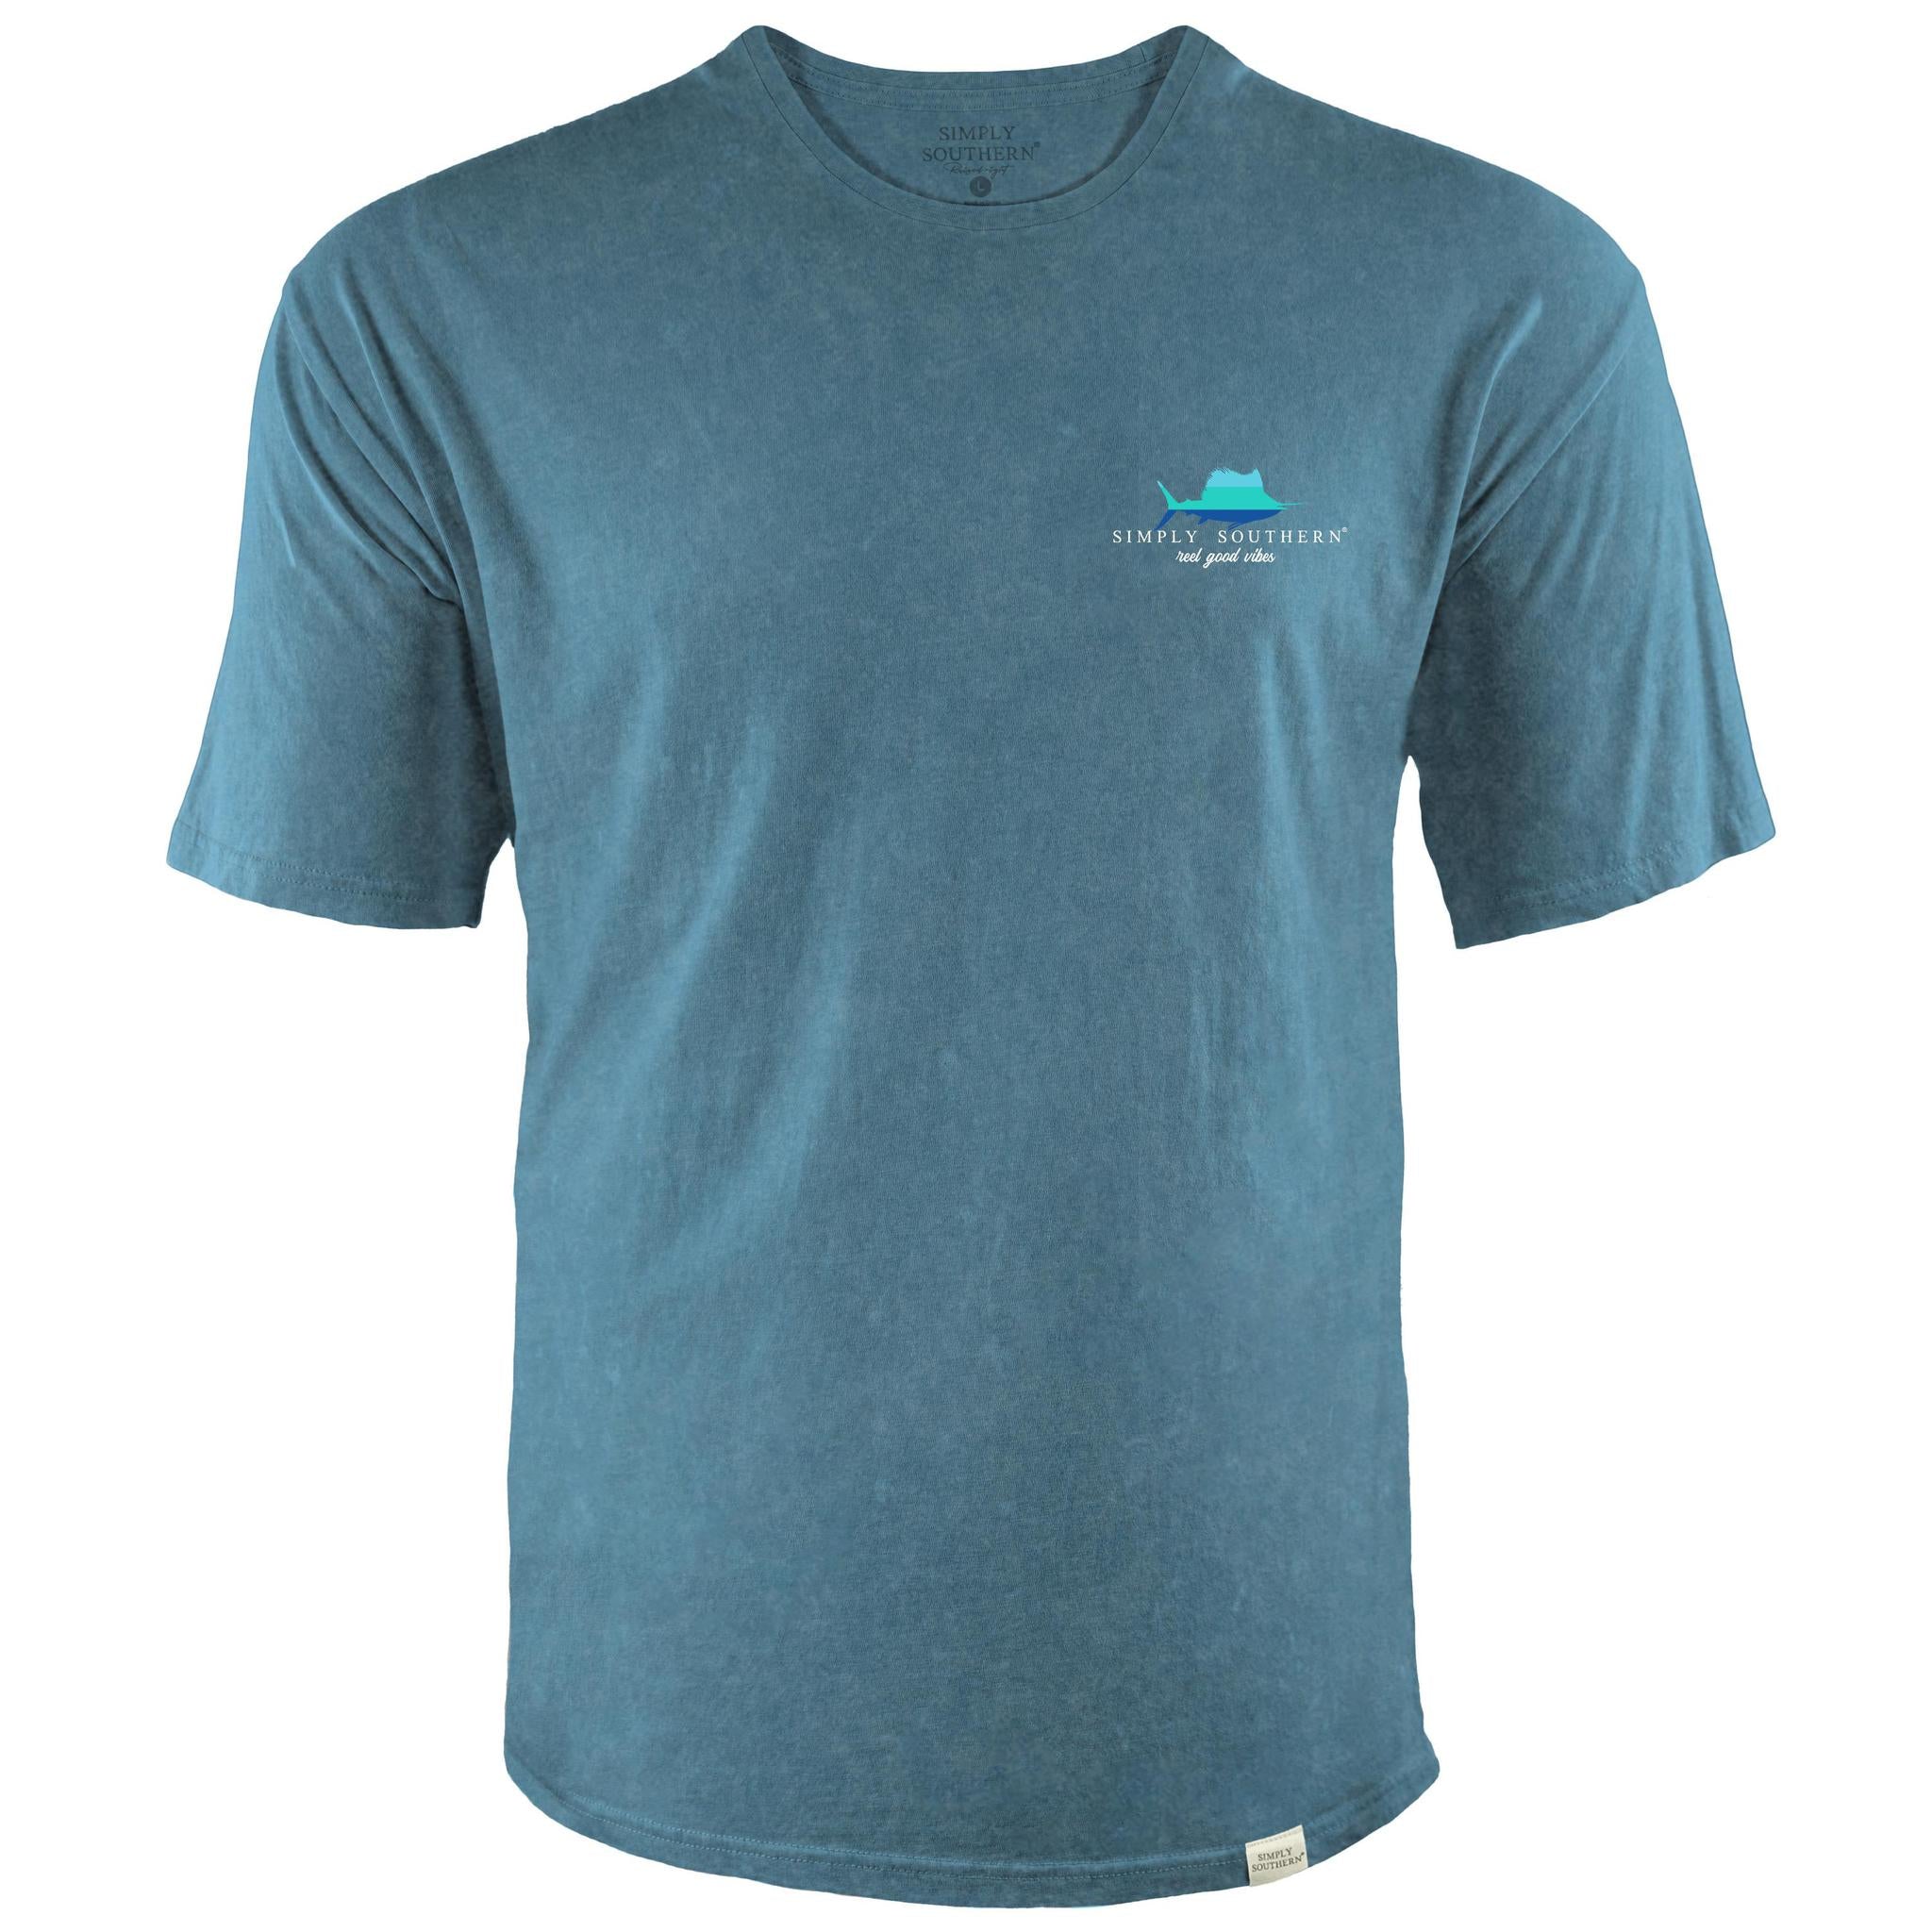 Sea Flag (Men's Short Sleeve T-Shirt) by Simply Southern – Here